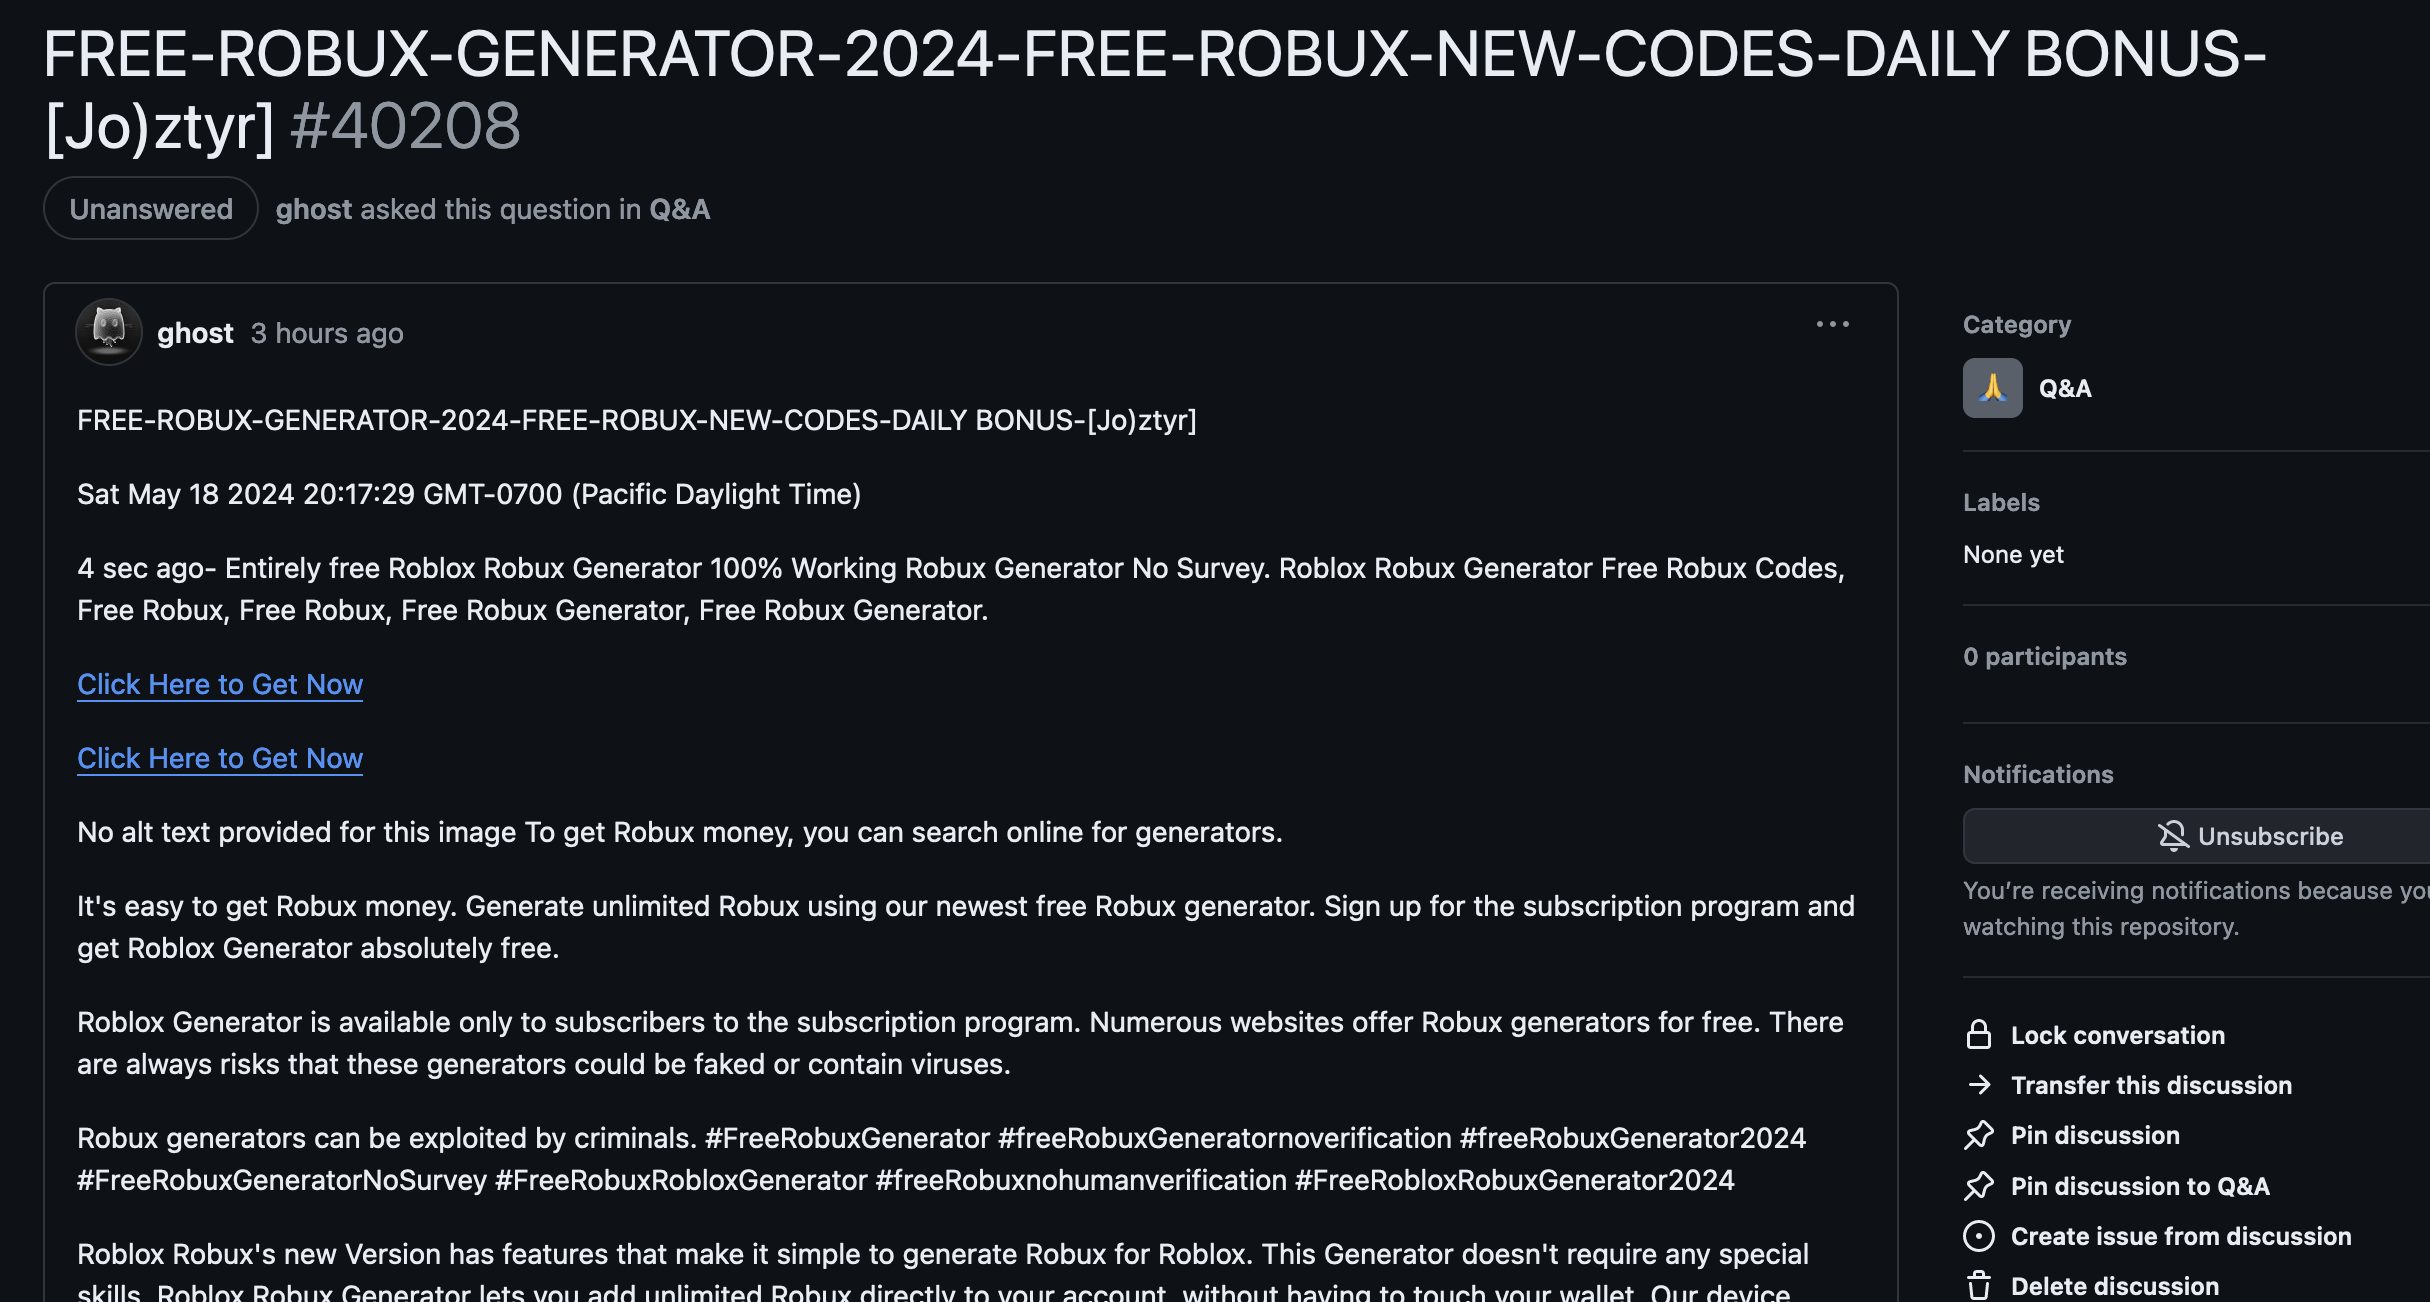 Screenshot of the GitHub interface showing a spam GitHub discussion with 'FREE-ROBUX-GENERATOR-2024-FREE-ROBUX-NEW-CODES-DAILY BONUS-[Jo)ztyr]' title, and a content matching this title, with links to get it